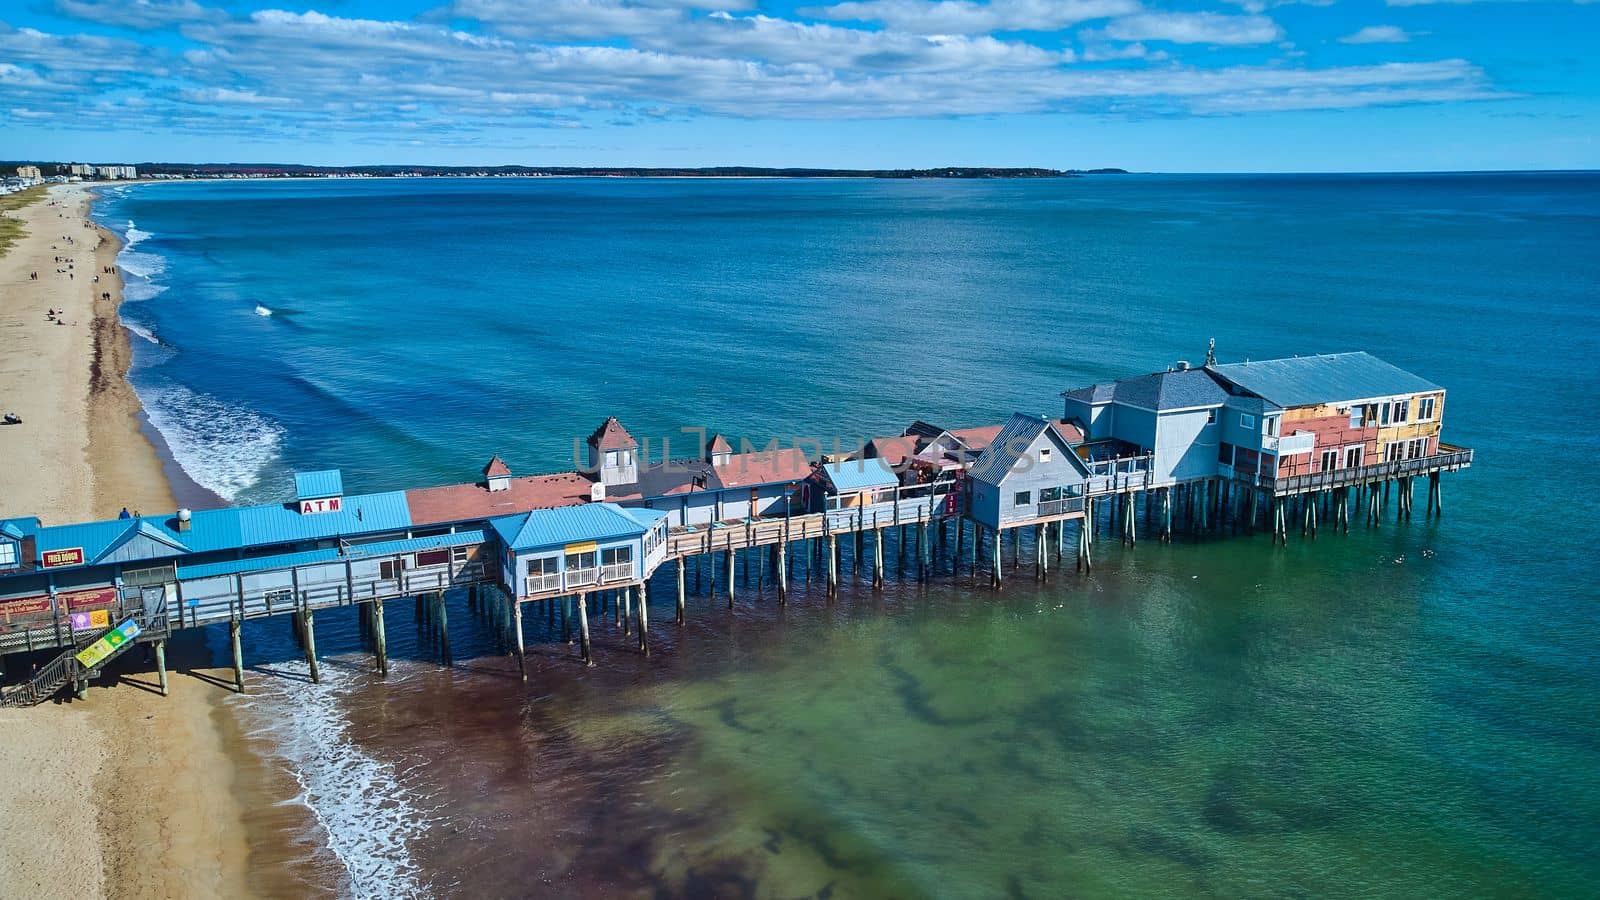 Beach on Maine ocean aerial over large wood pier covered in shops by njproductions